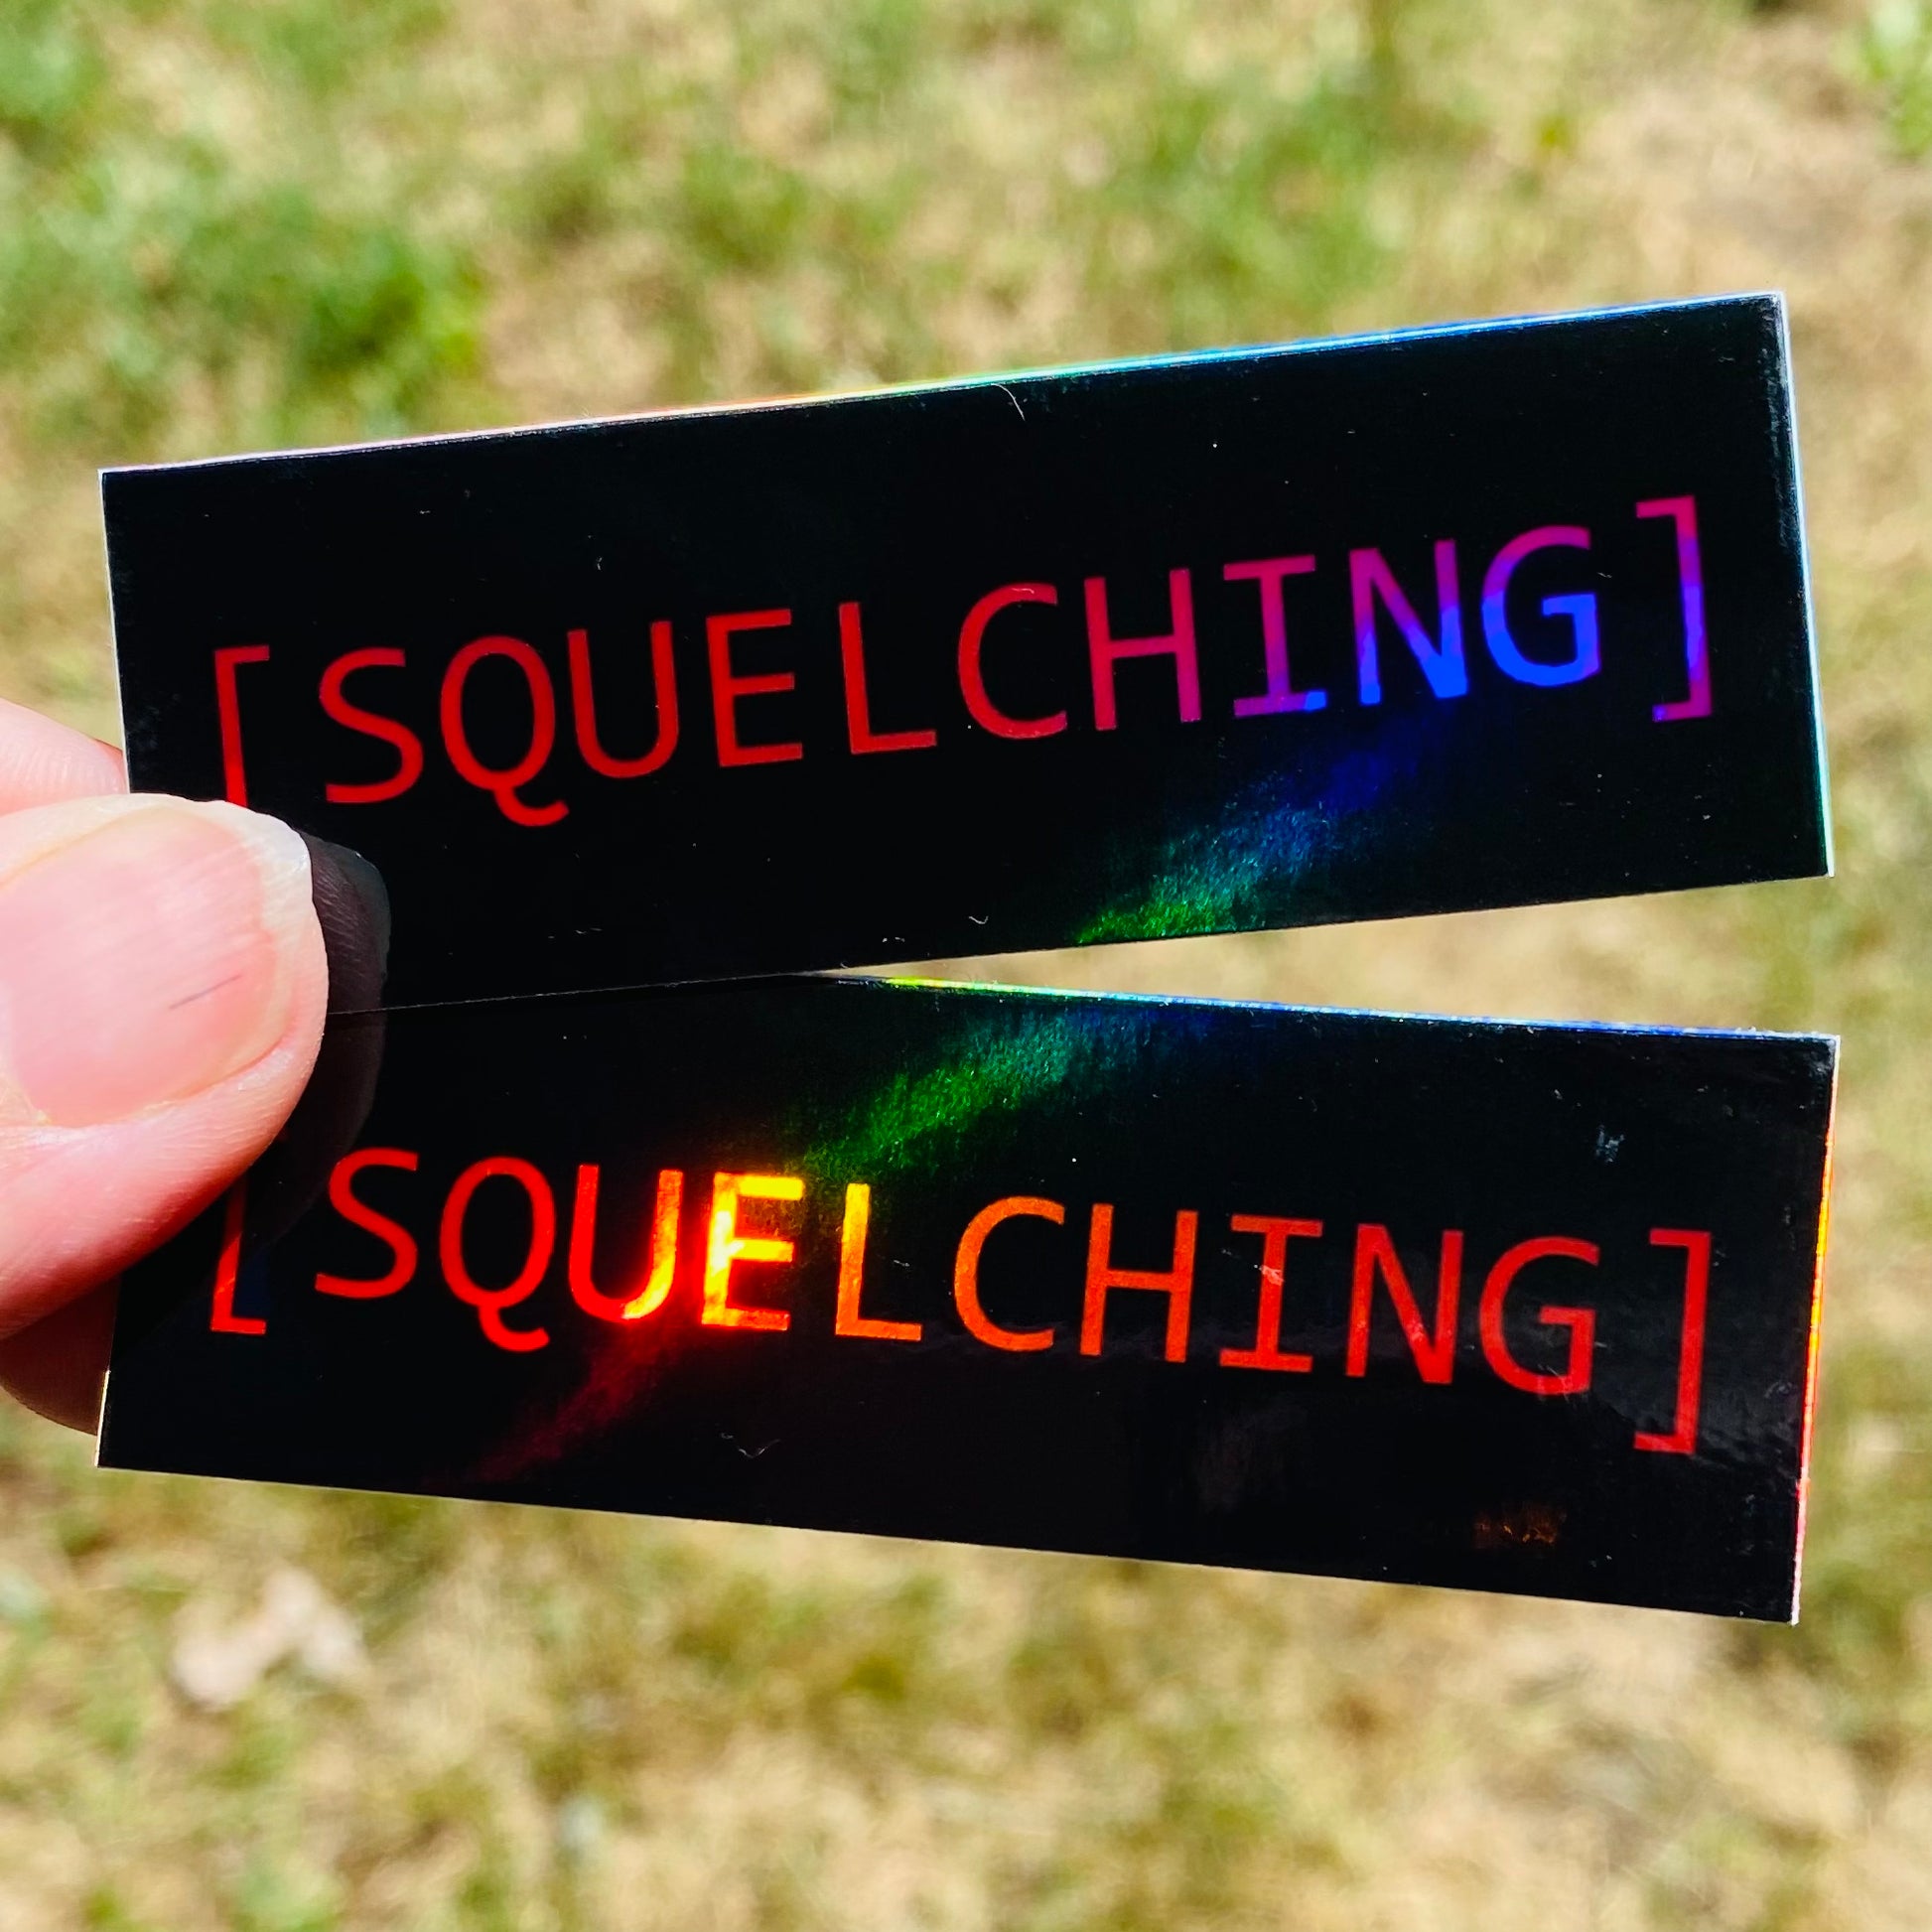 Holographic Sticker Sheet Printing in SG